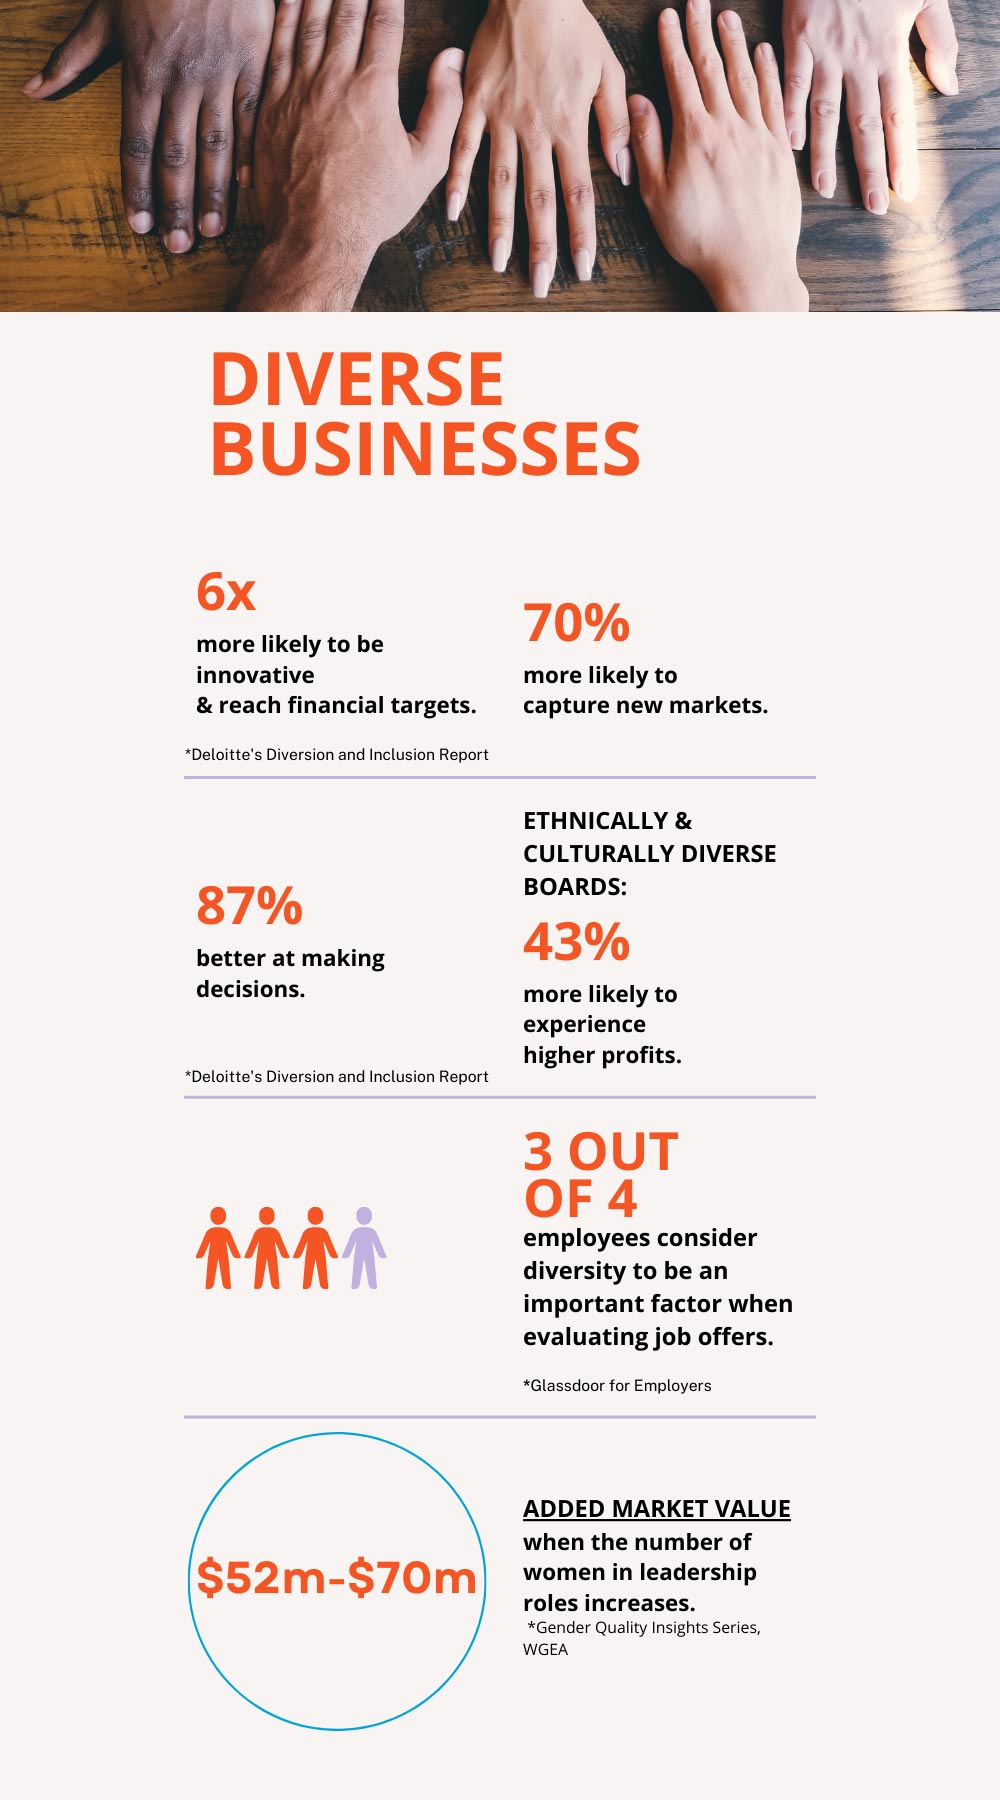 diversity in business infographic